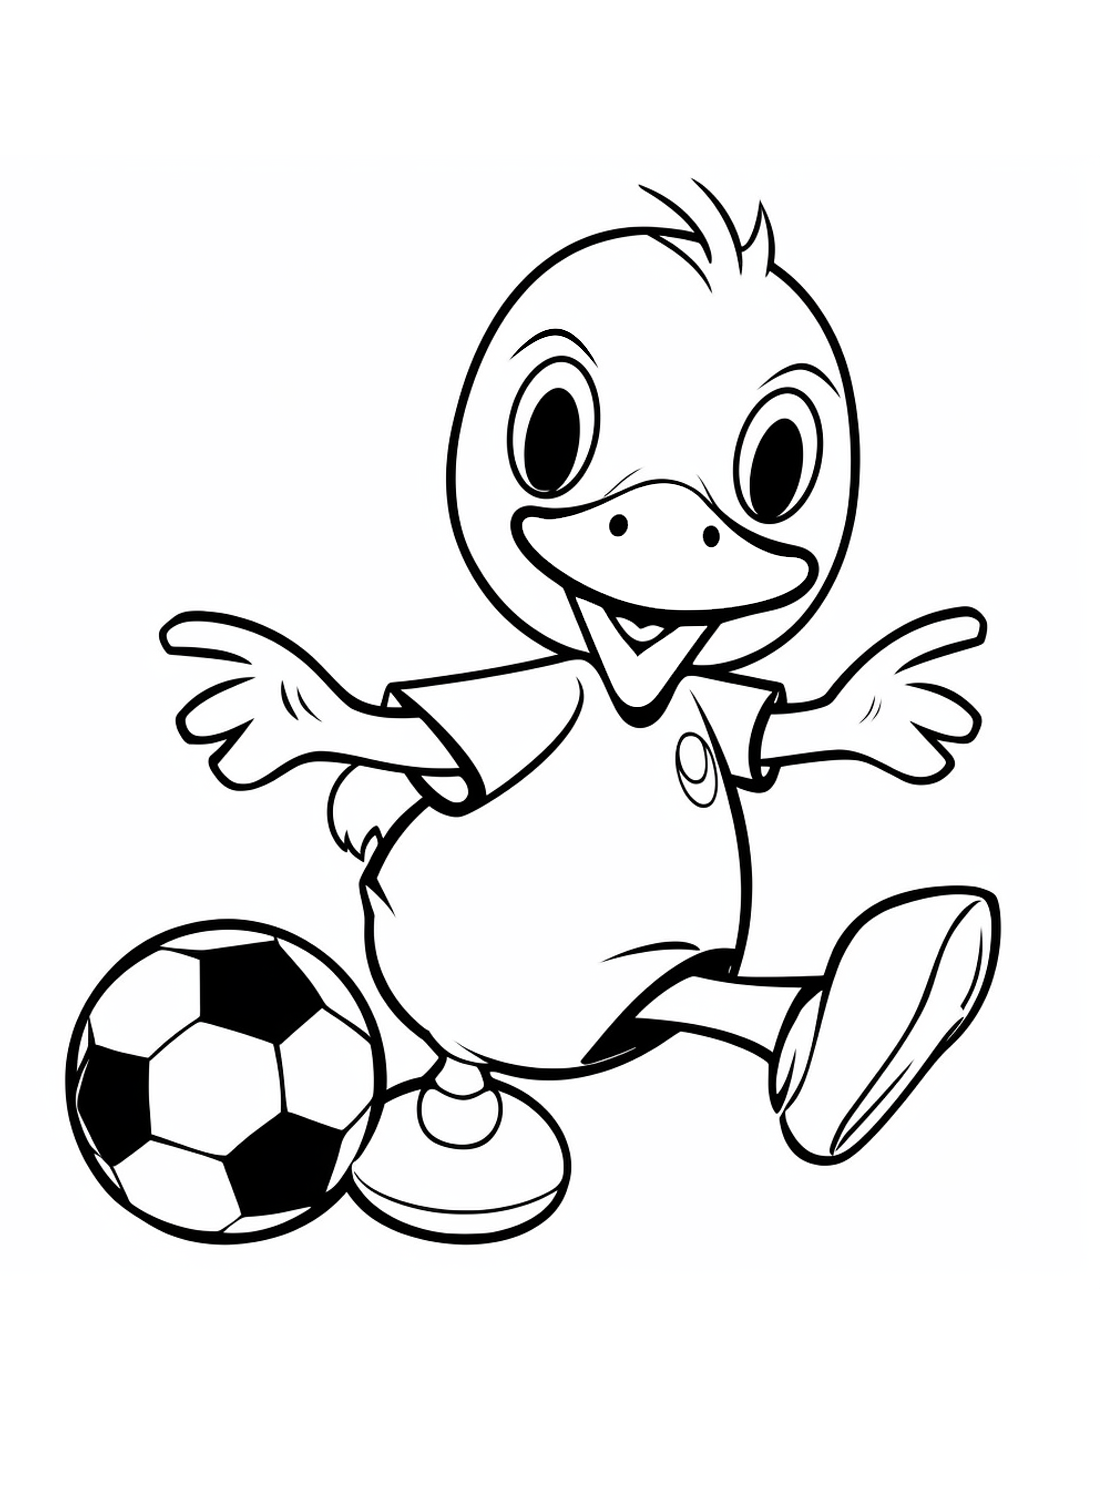 A duckling play soccer from Duckling